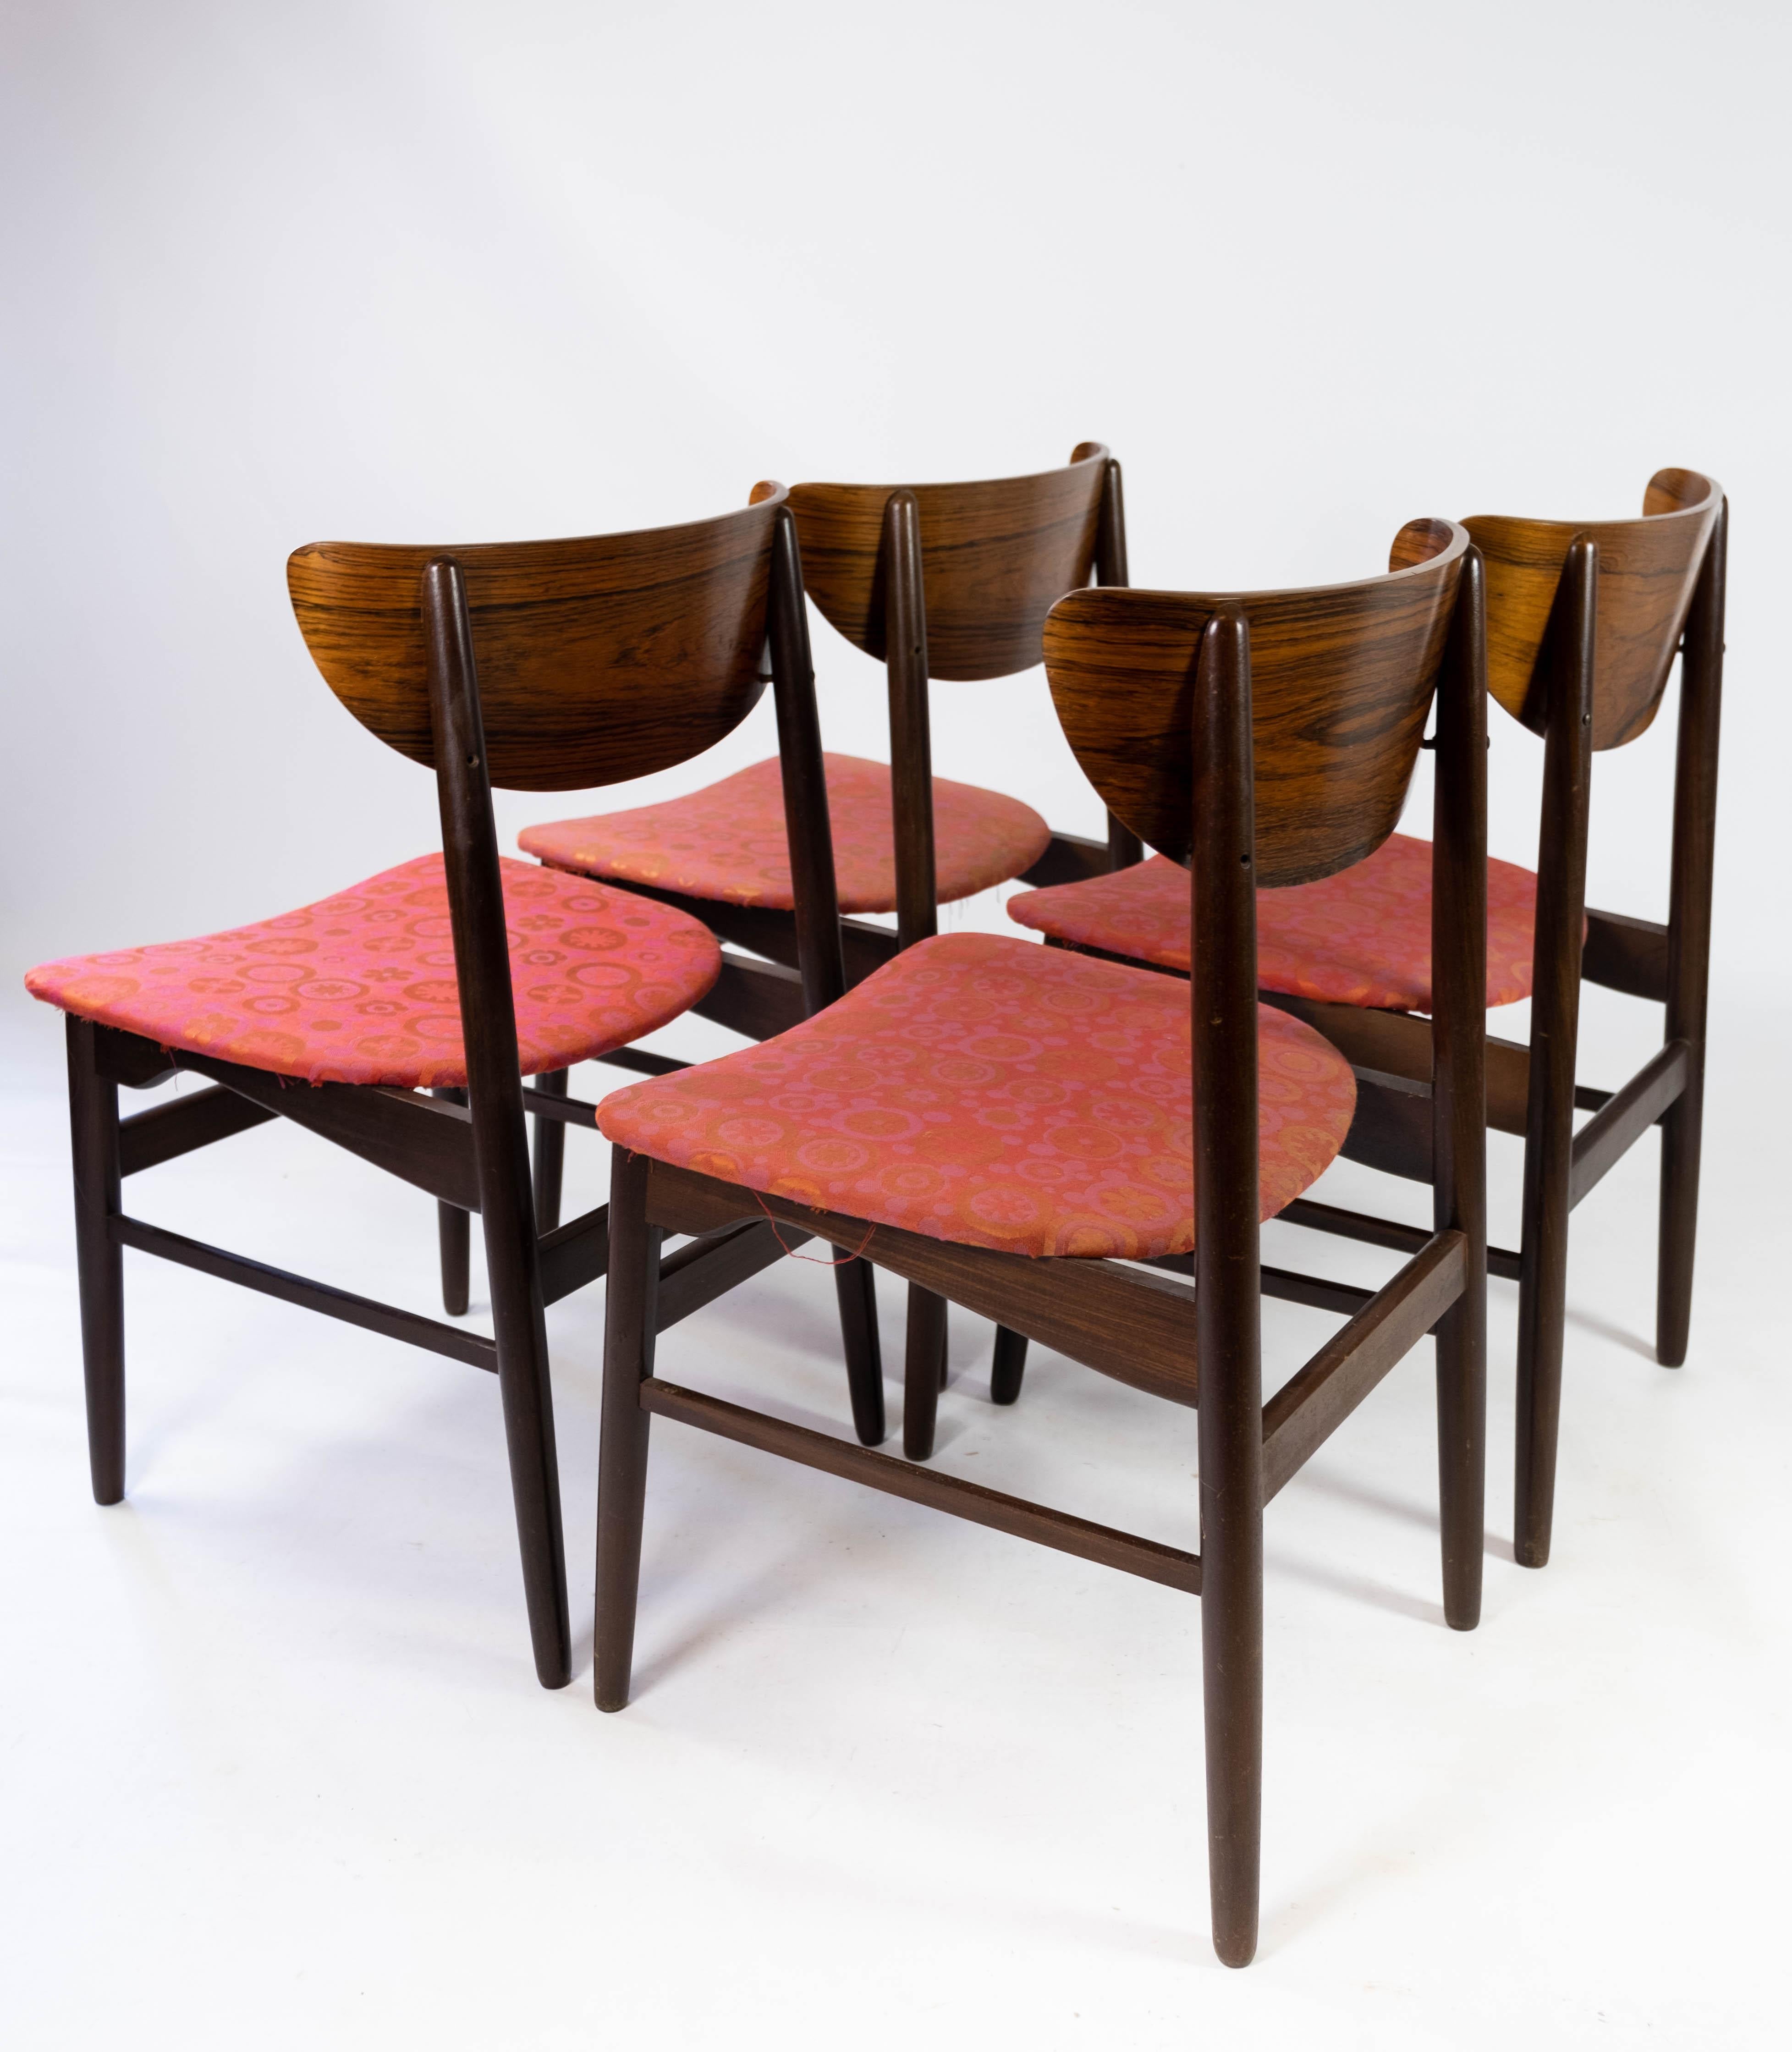 Set of Four Dining Room Chairs in Rosewood, of Danish Design, 1960s For Sale 2